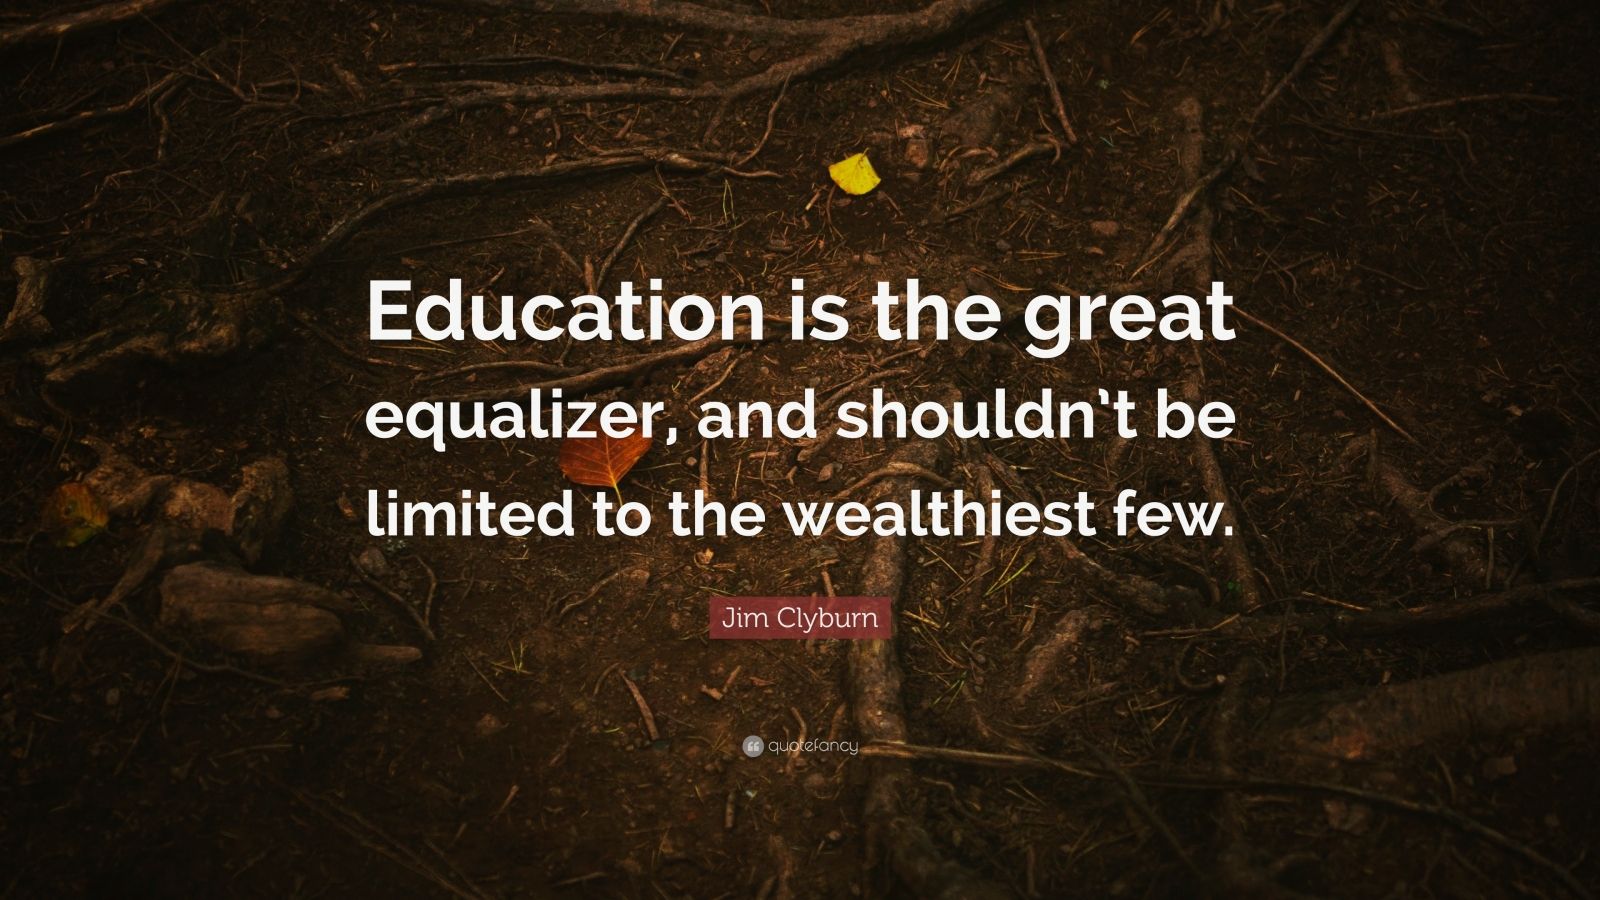 Education is the great equalizer and shouldn't be limited to the wealthiest few.